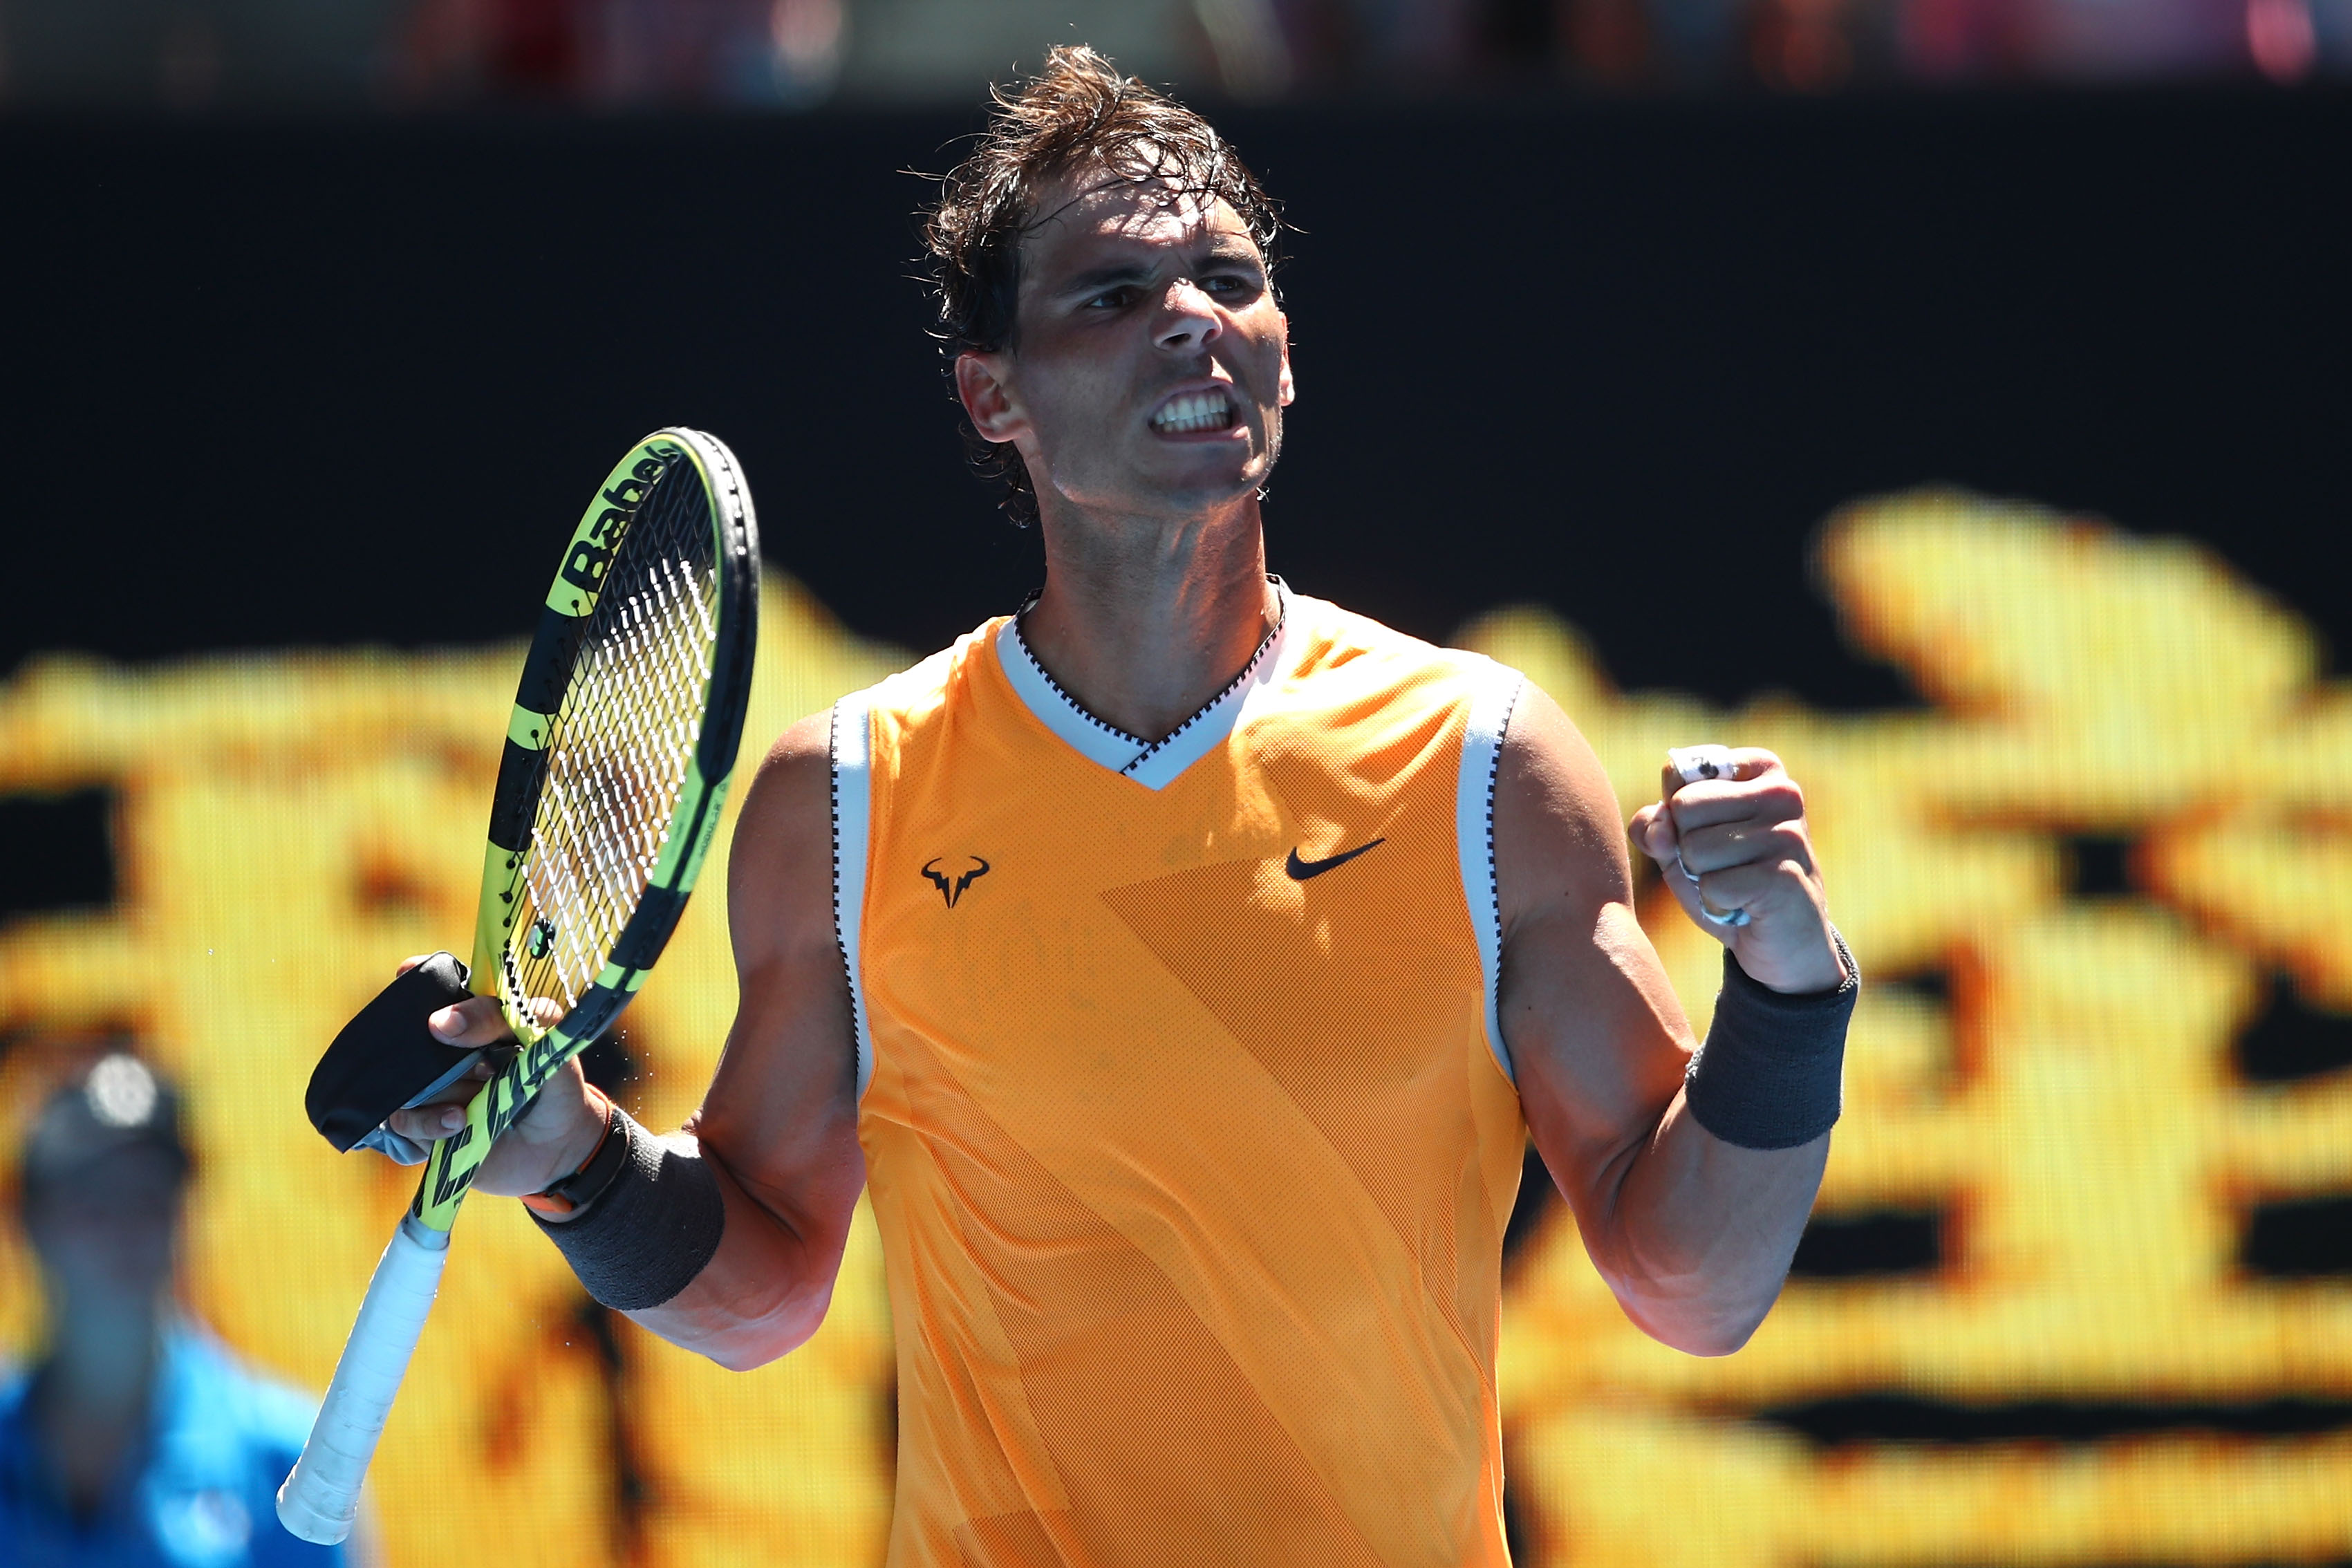 WATCH Nadal reacts to pain-free win over Duckworth at Australian Open